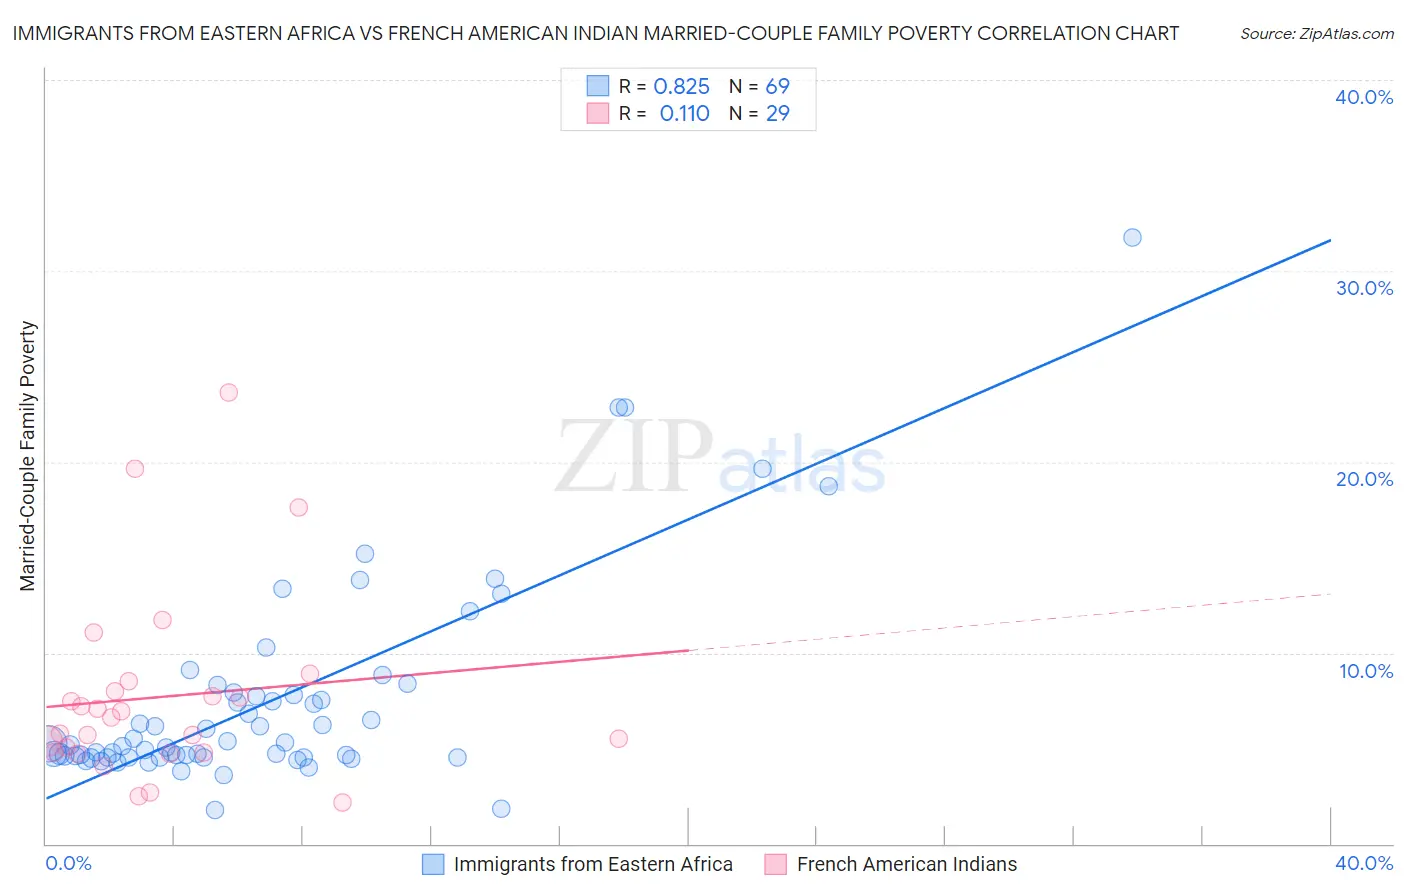 Immigrants from Eastern Africa vs French American Indian Married-Couple Family Poverty